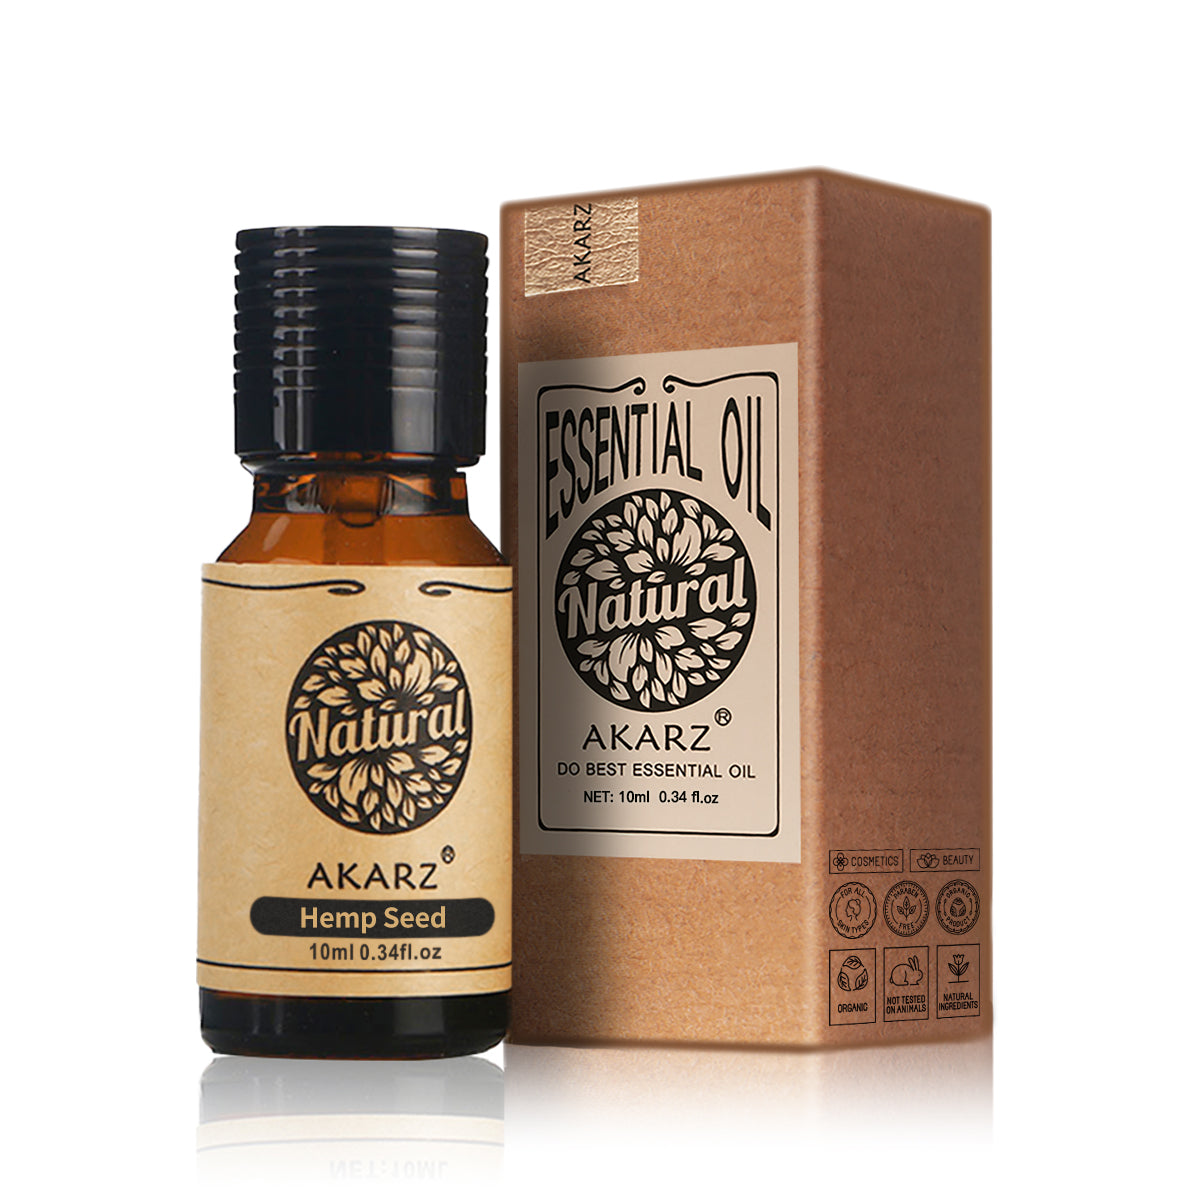 AKARZ Soothing Massage Aroma Oil Hemp Seed Carrier Oil for DIY Hydrating & Nourishing Natural Formula from Kazakhstan